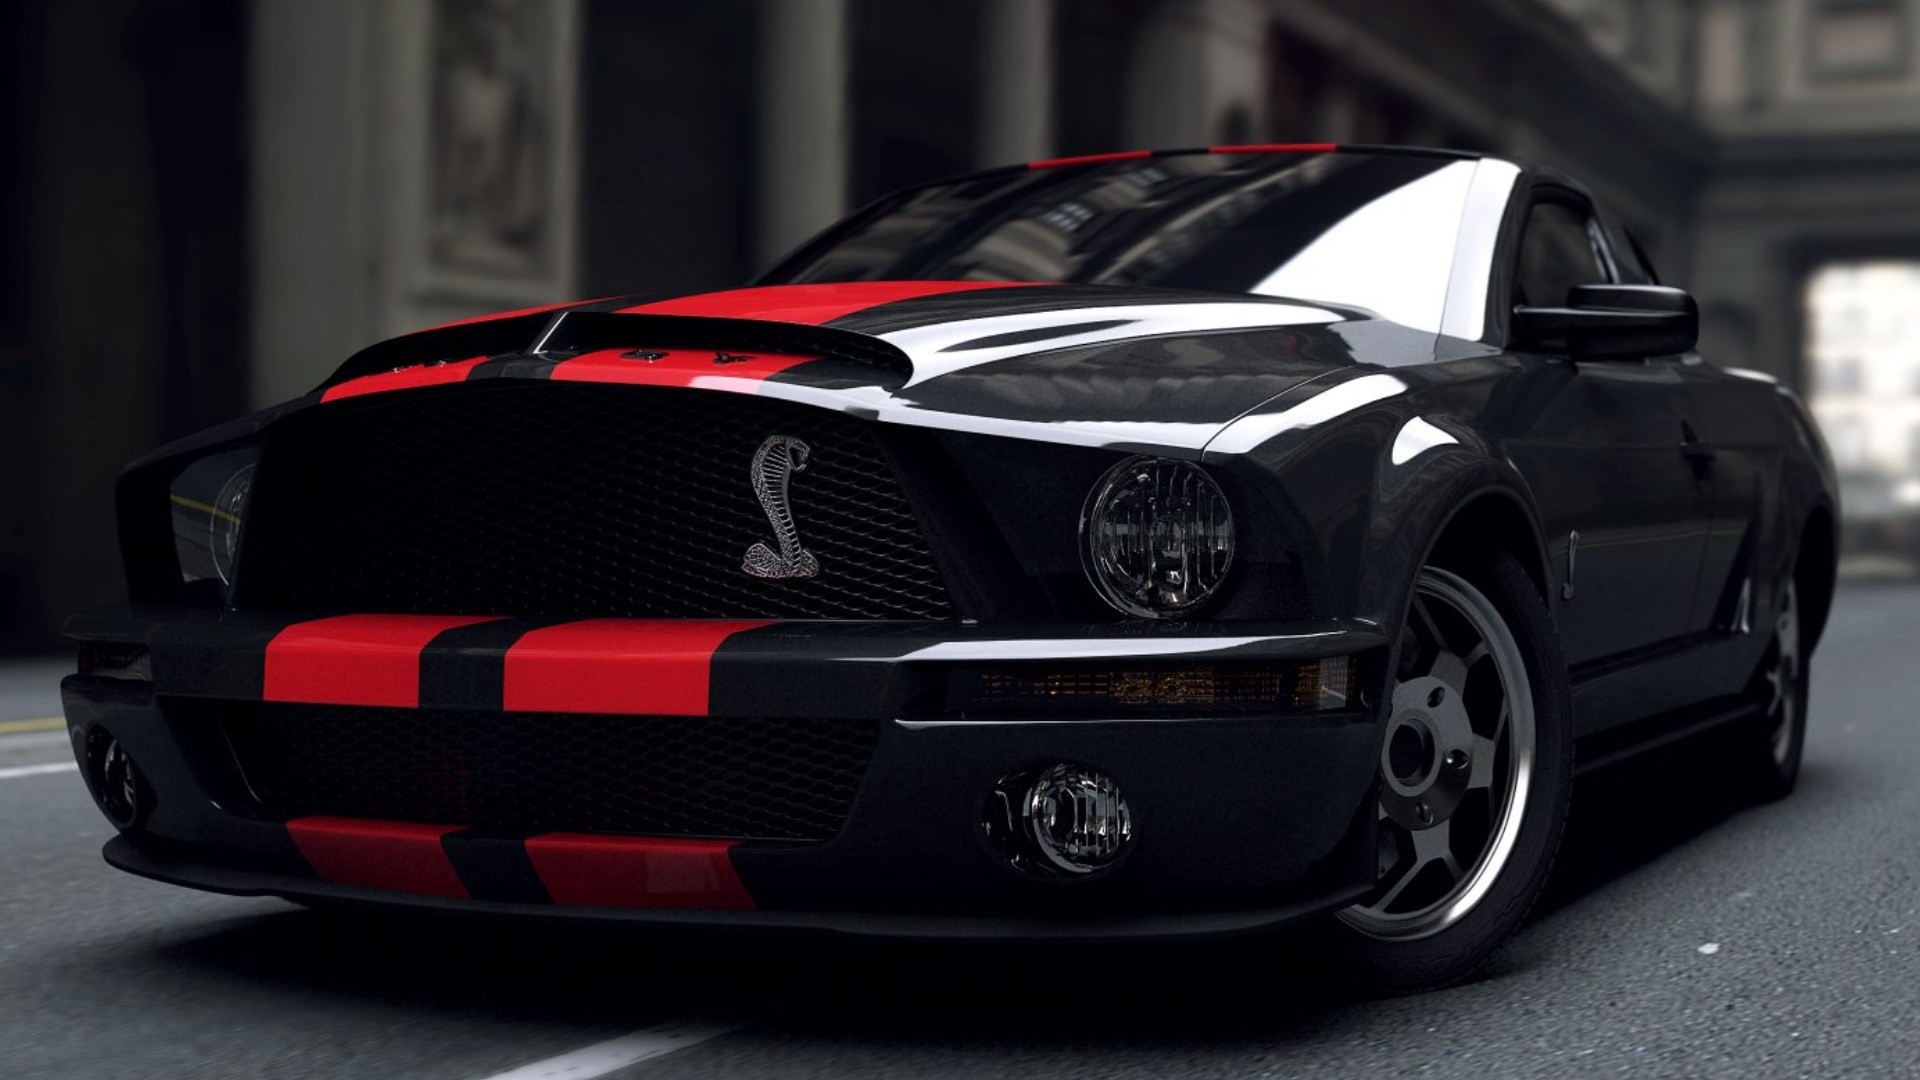 1920x1080 Ford Mustang Shelby GT500 Wallpaper 6 - 1920 X 1080